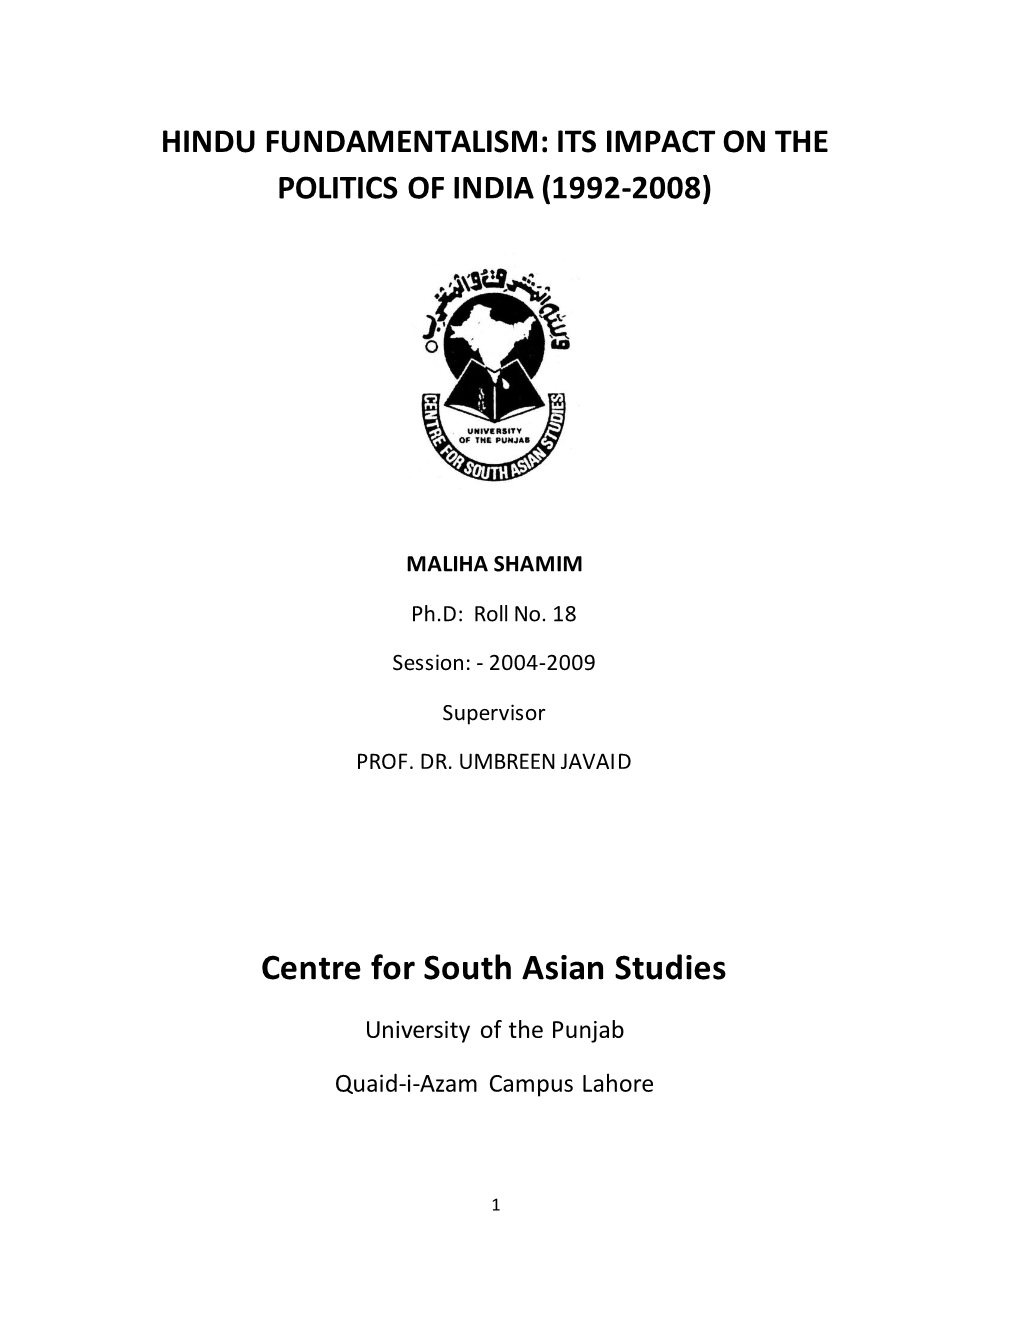 Centre for South Asian Studies